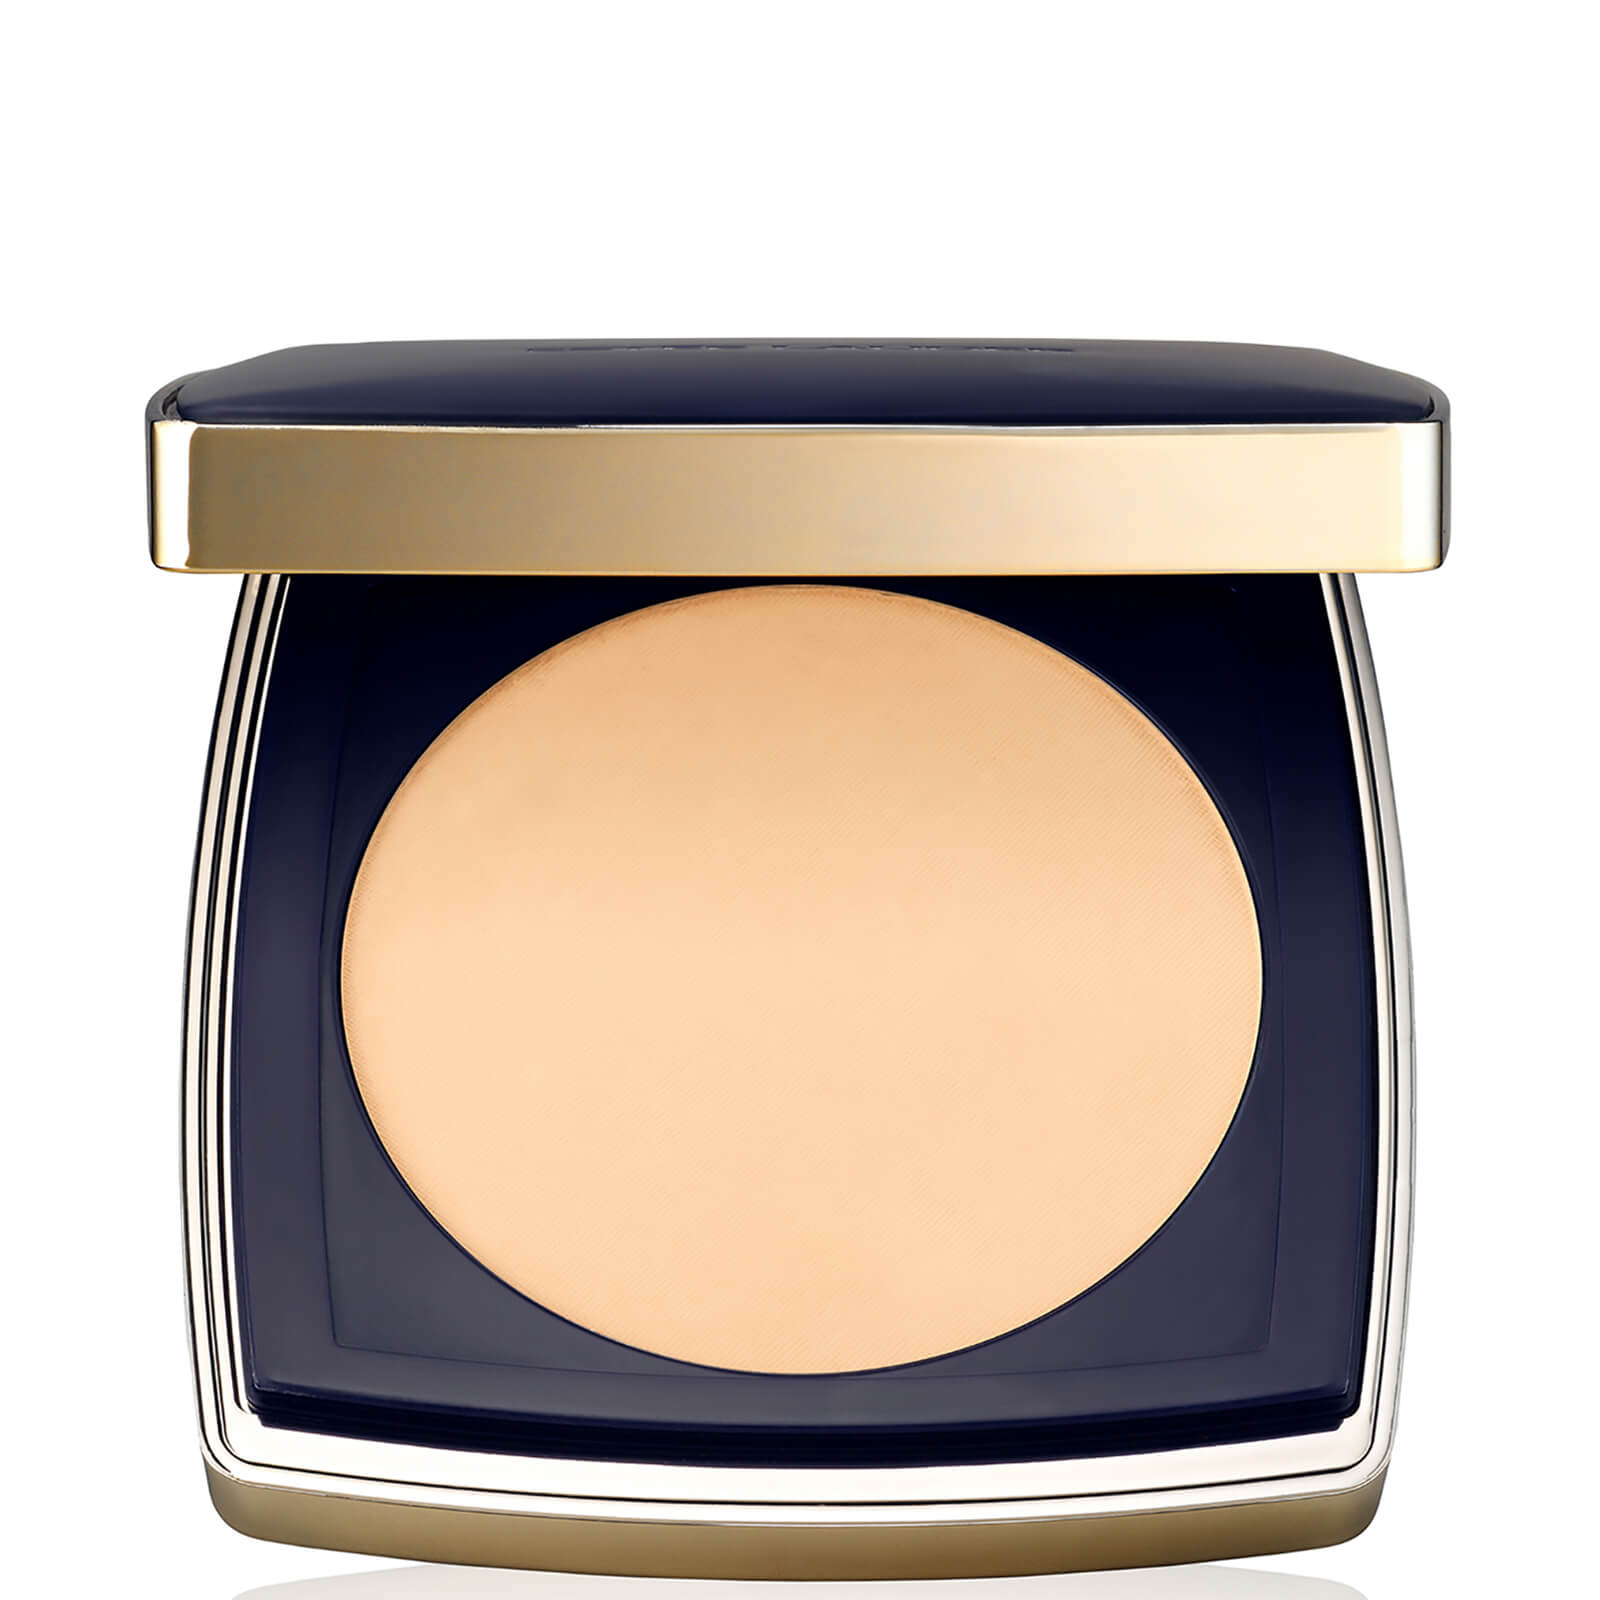 Estee Lauder Double Wear Stay-in-Place Matte Powder Foundation SPF10 12g (Various Shades) - 2N2 Buff